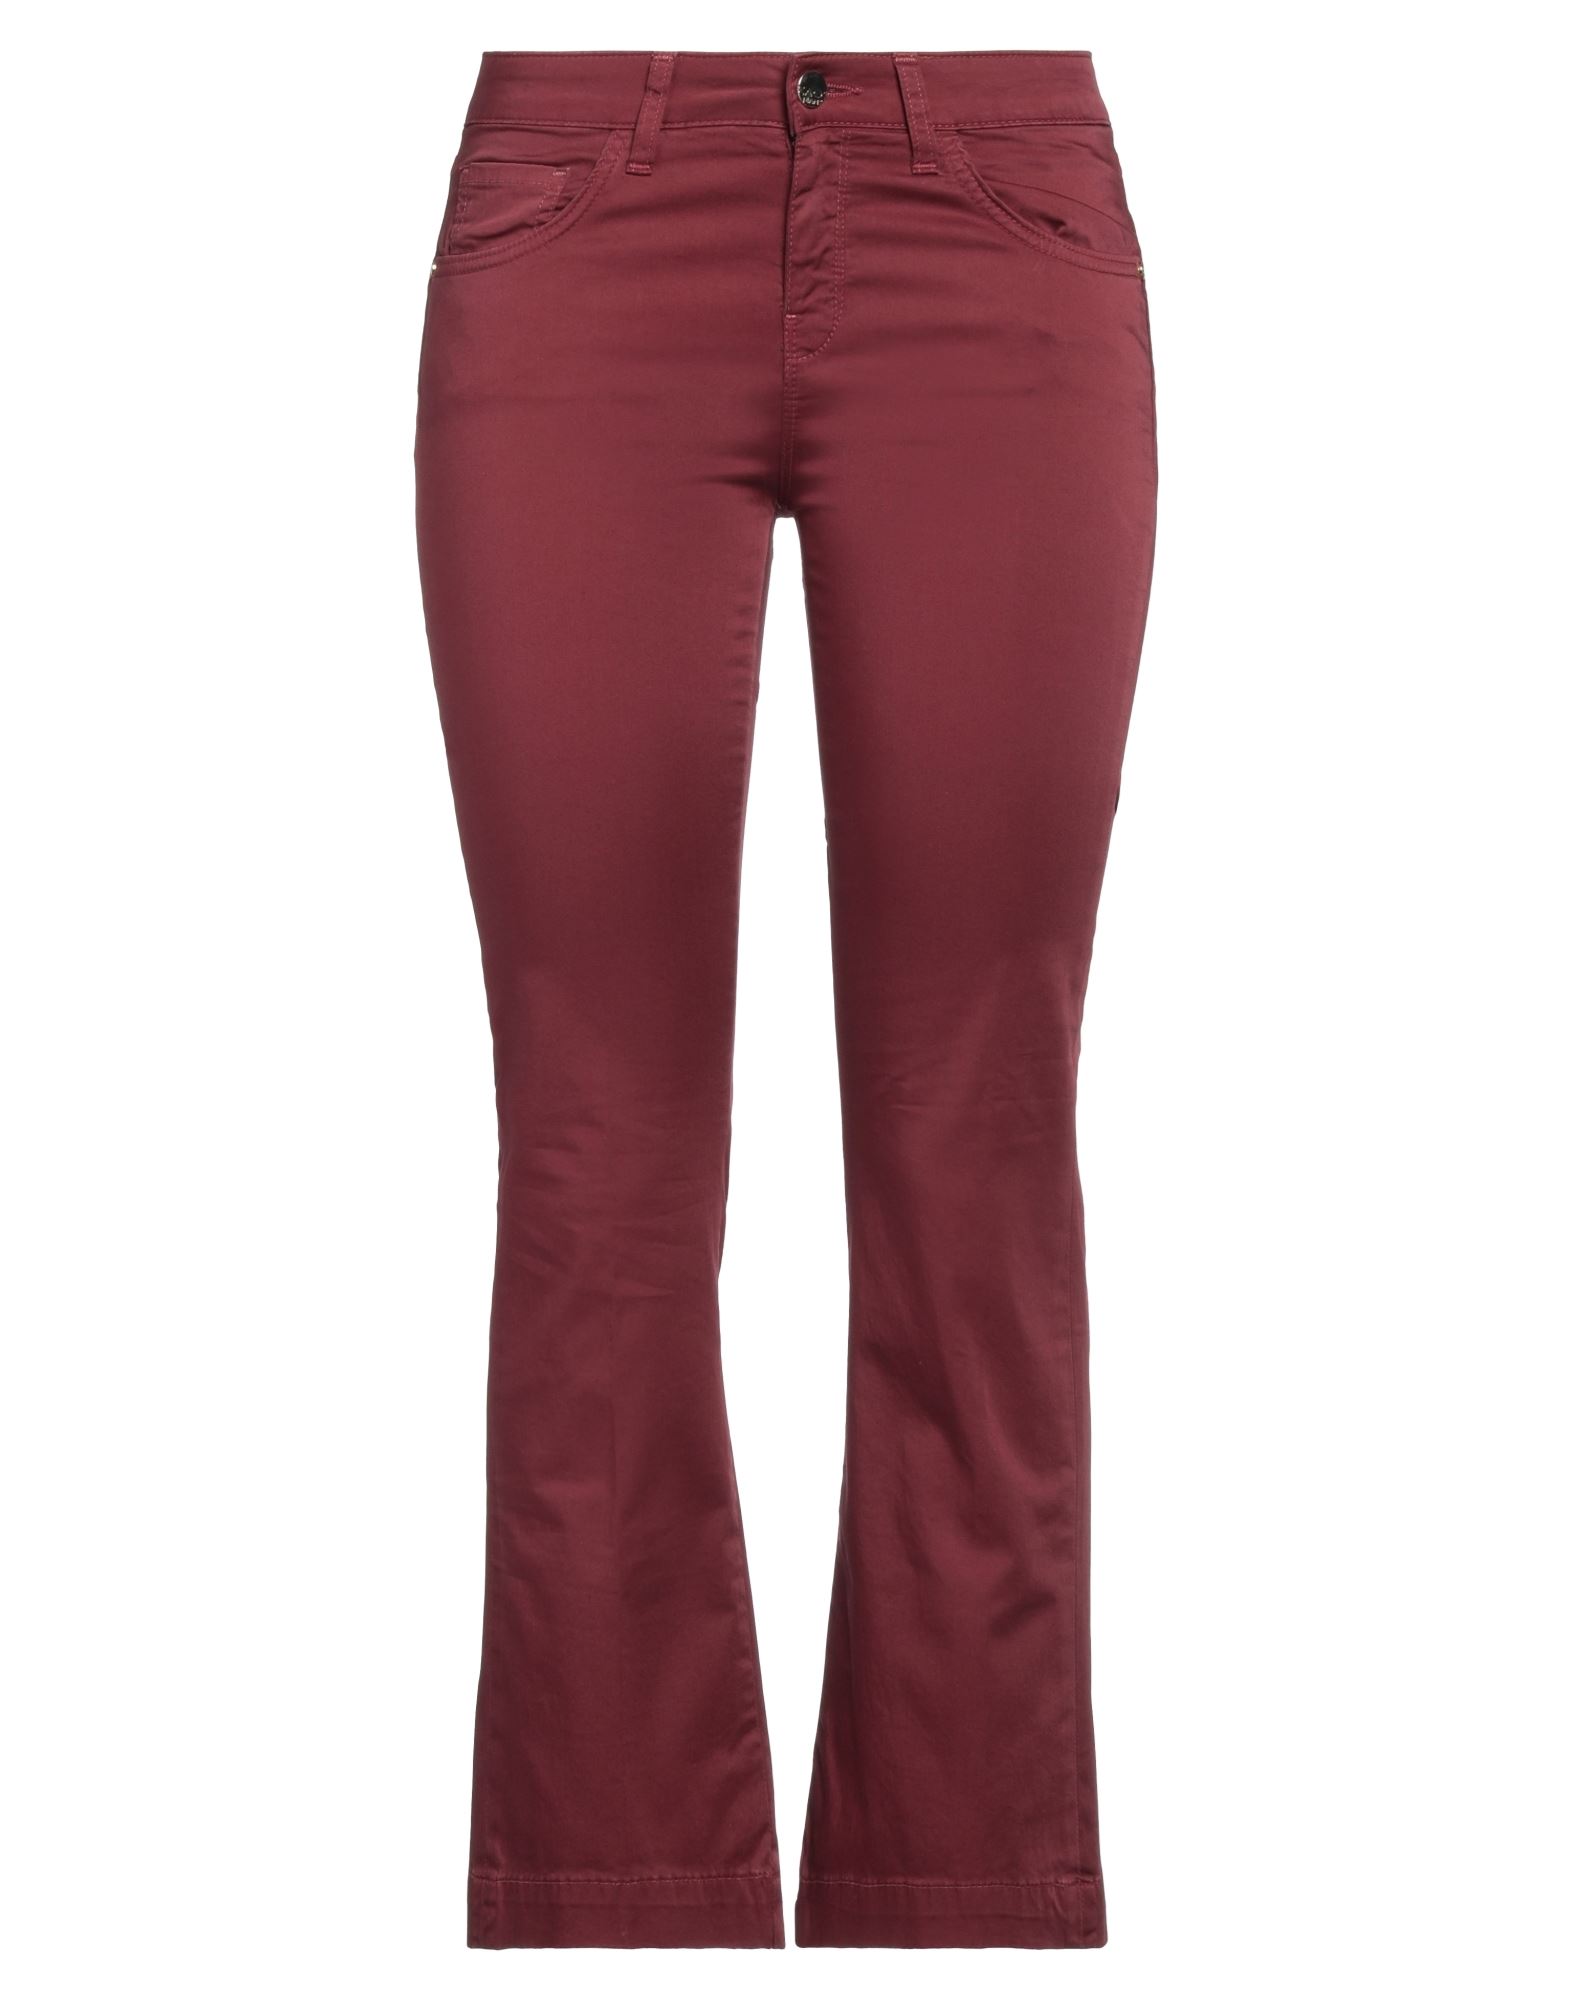 Kaos Jeans Pants In Red